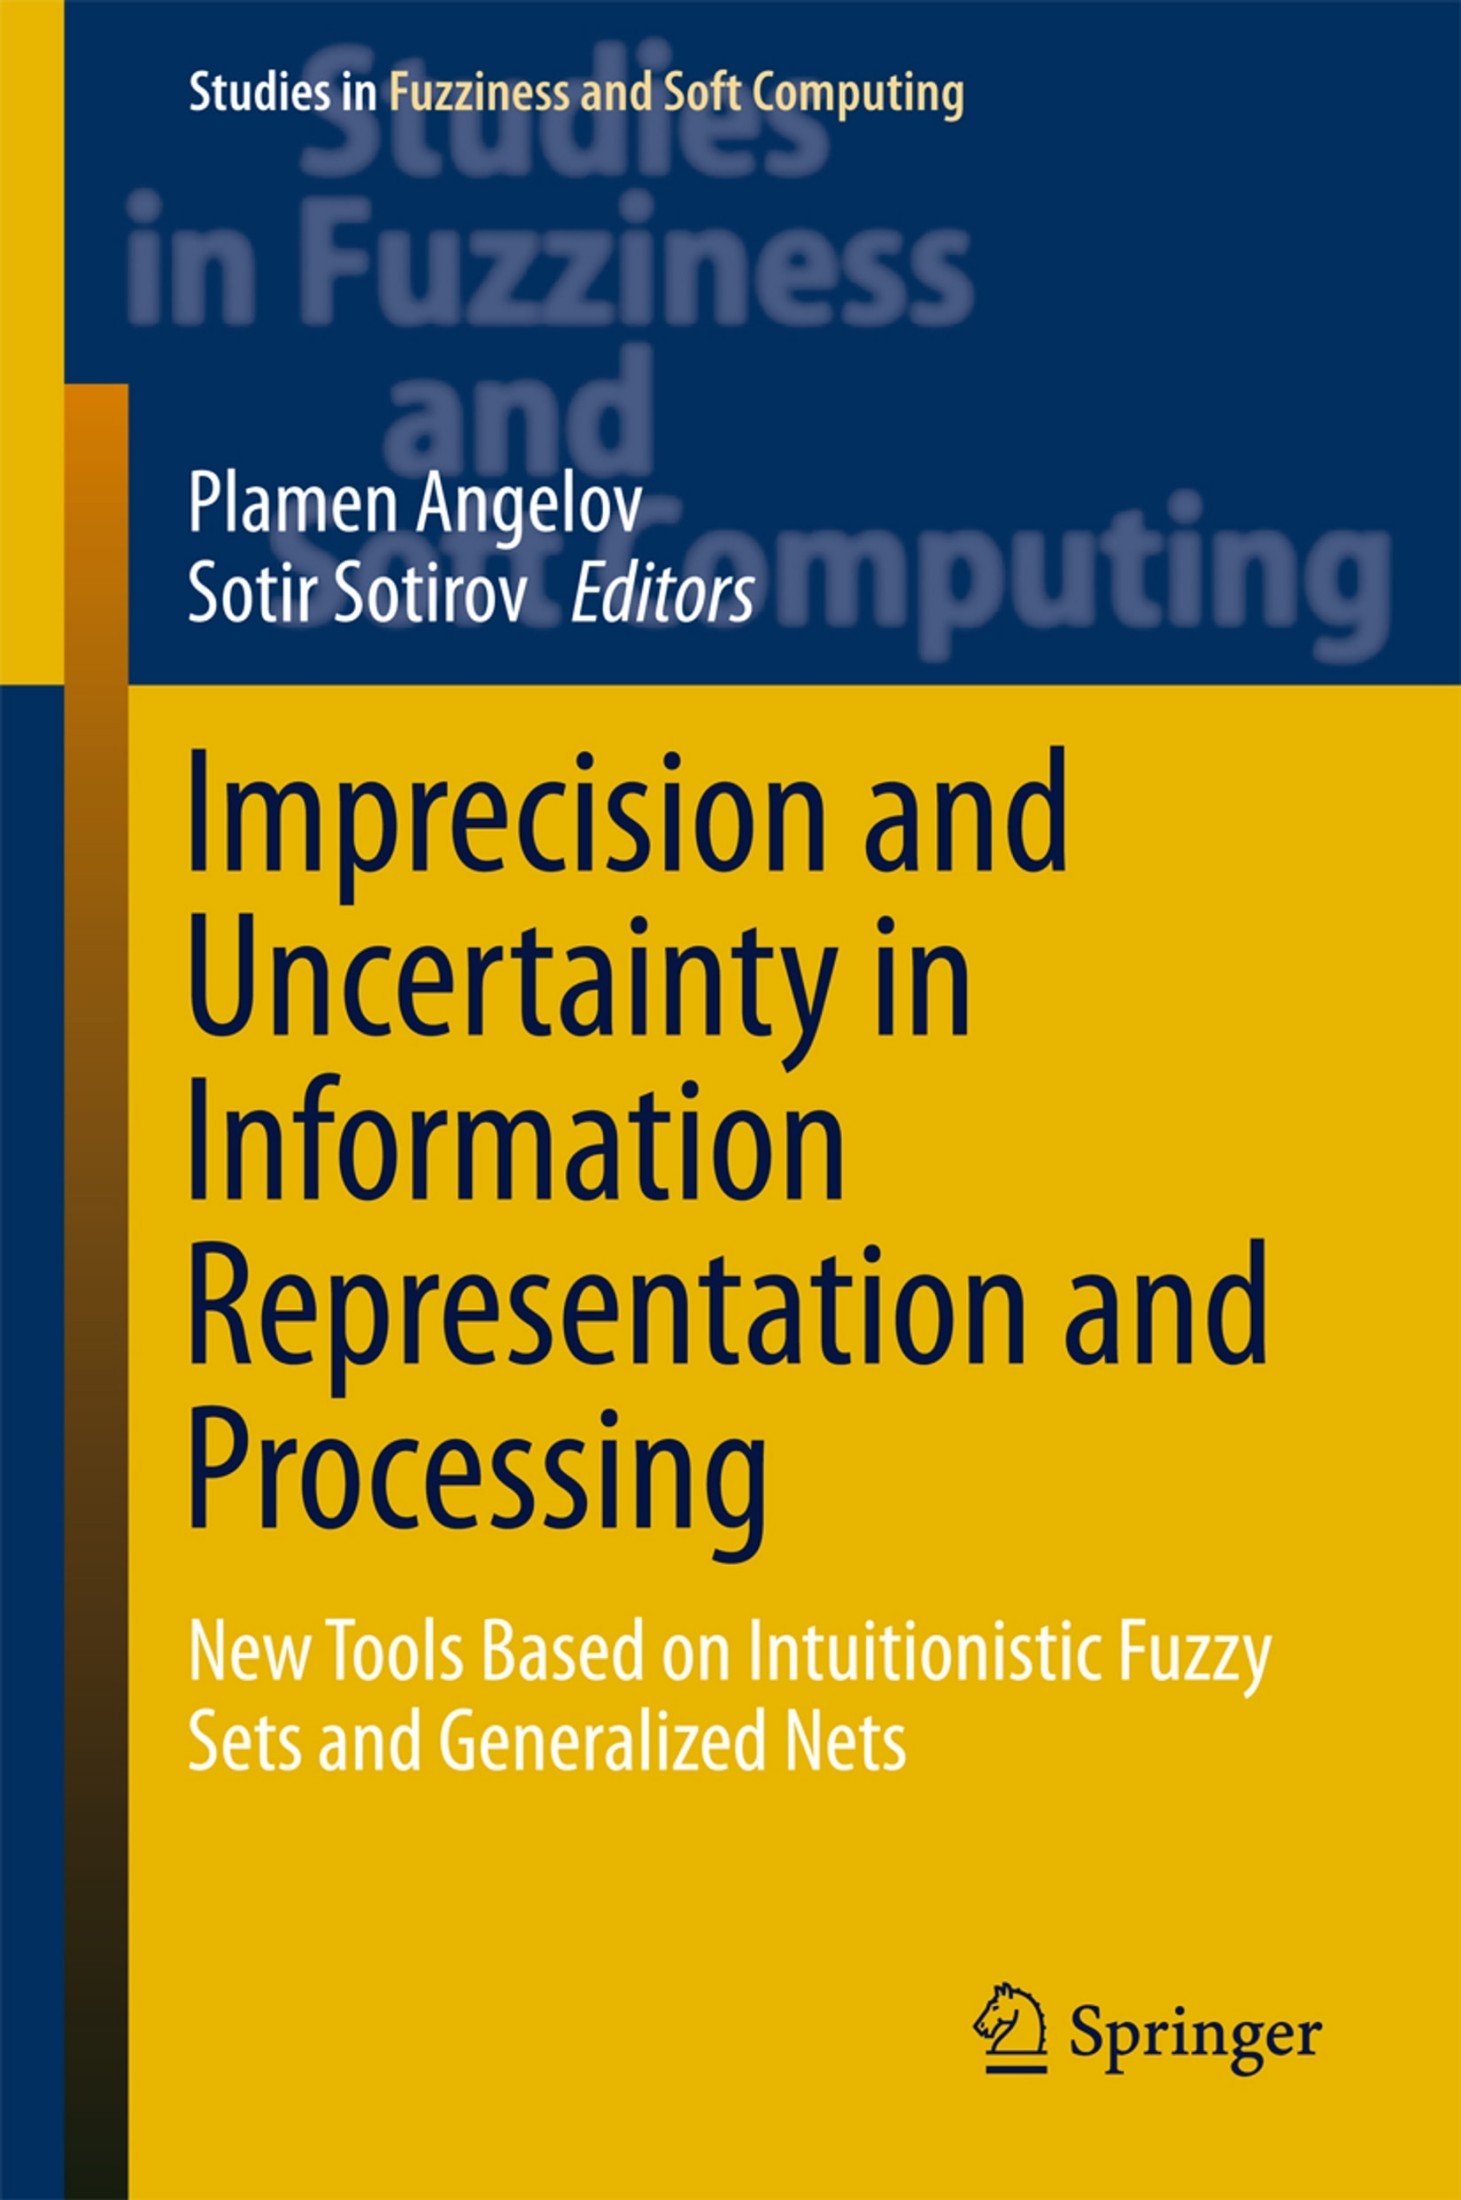 Imprecision and Uncertainty in Information Representation and Processing